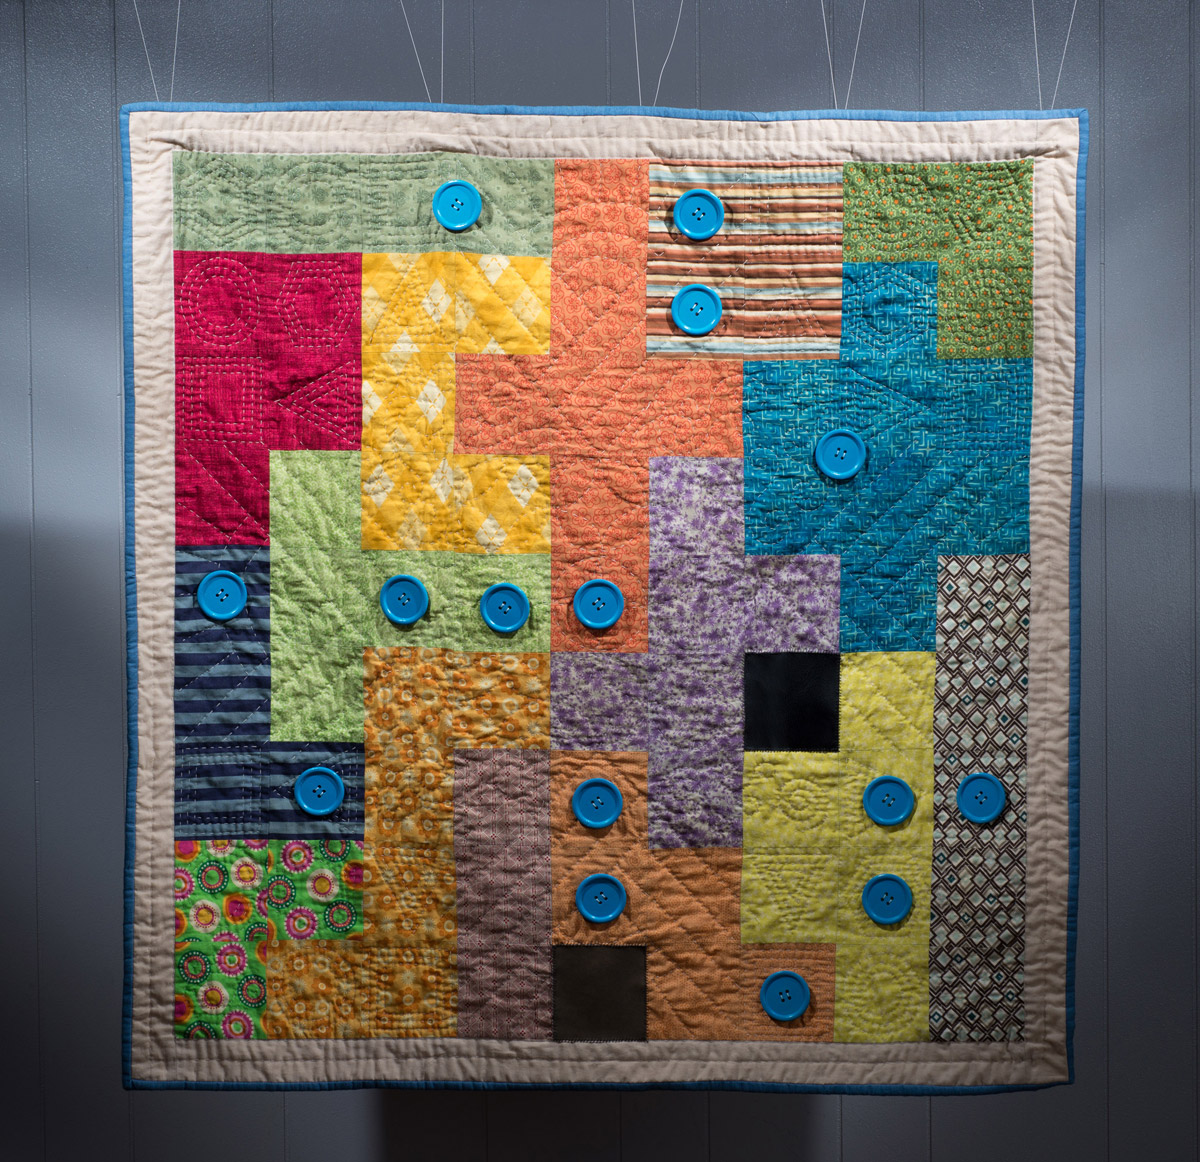 The final quilt on display